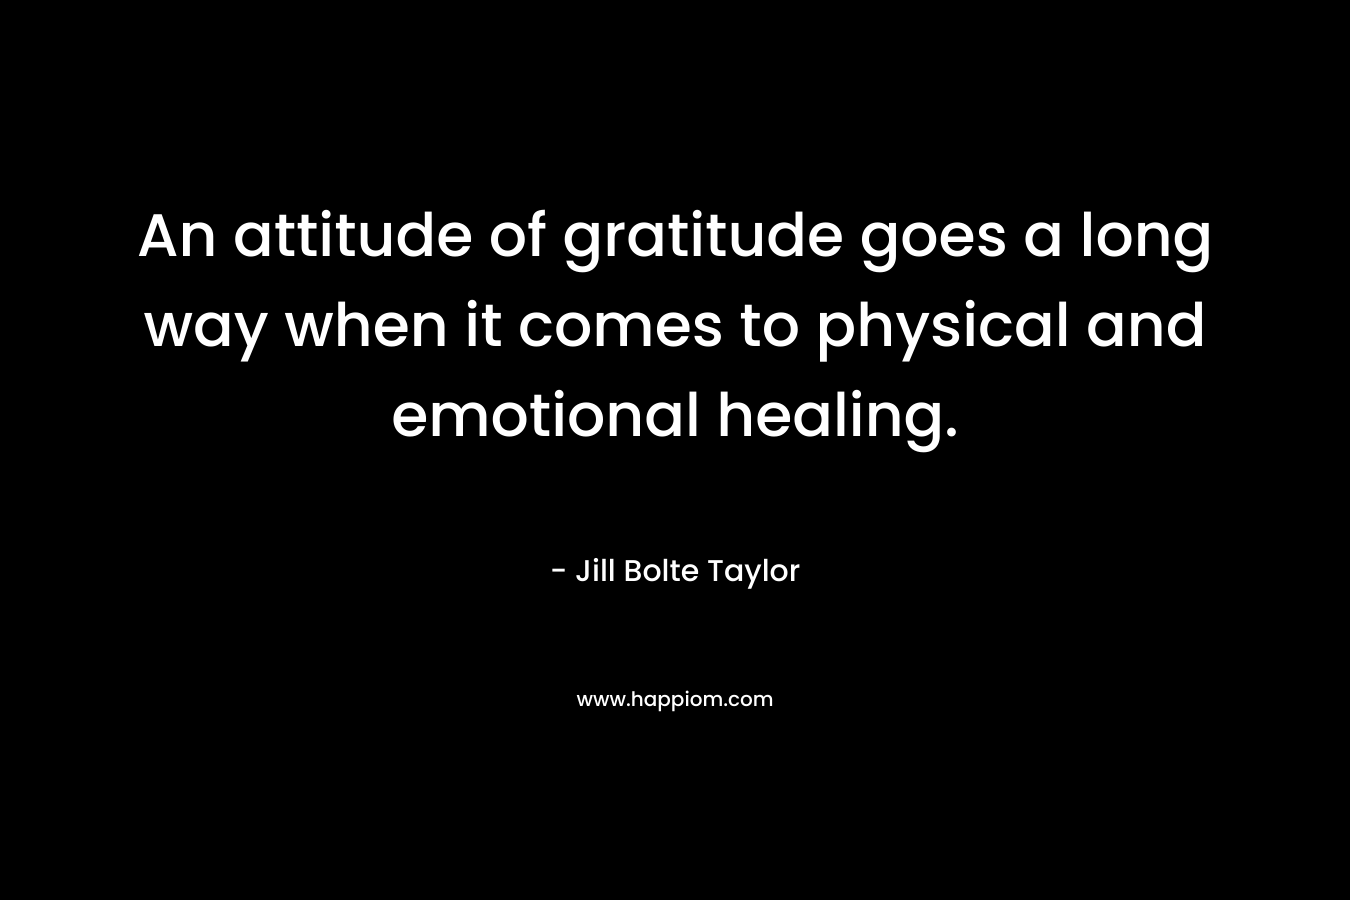 An attitude of gratitude goes a long way when it comes to physical and emotional healing.